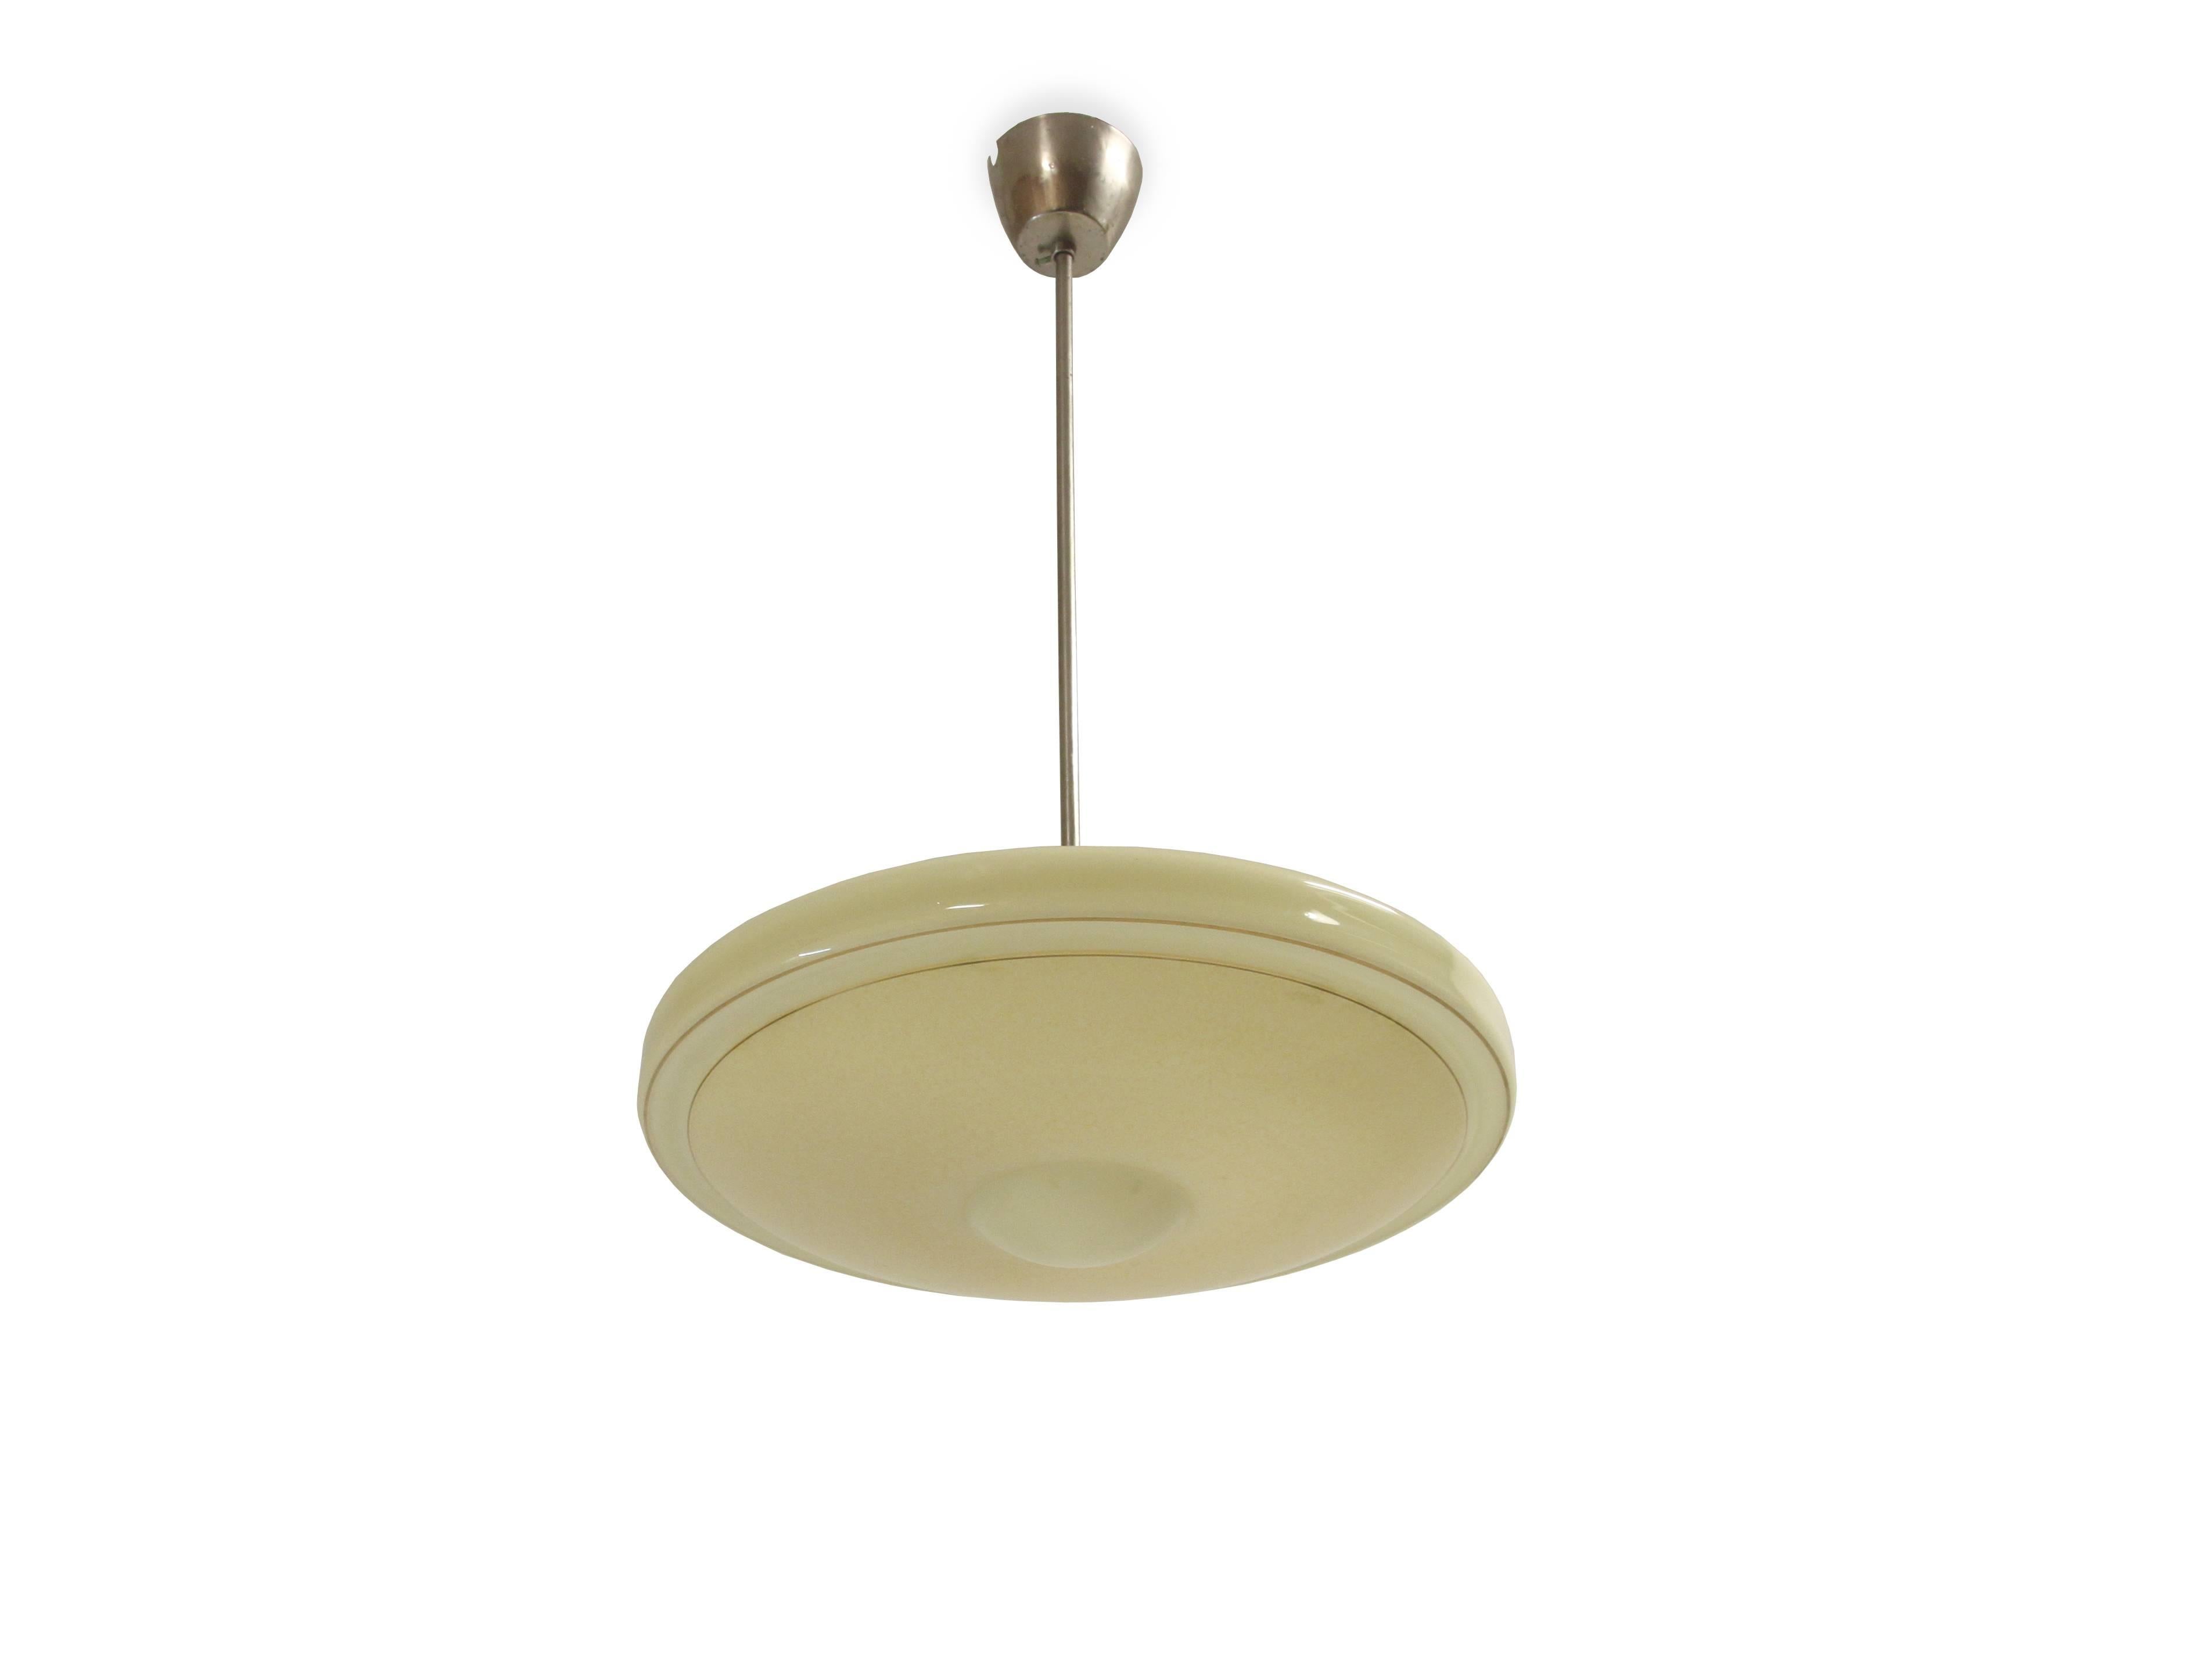 Wonderful and decorative ceiling light in opaline glass and stem in chrome. Designed and made in Norway by Høvik Verk from circa 1950s first half.
The lamp is fully working and in good vintage condition.